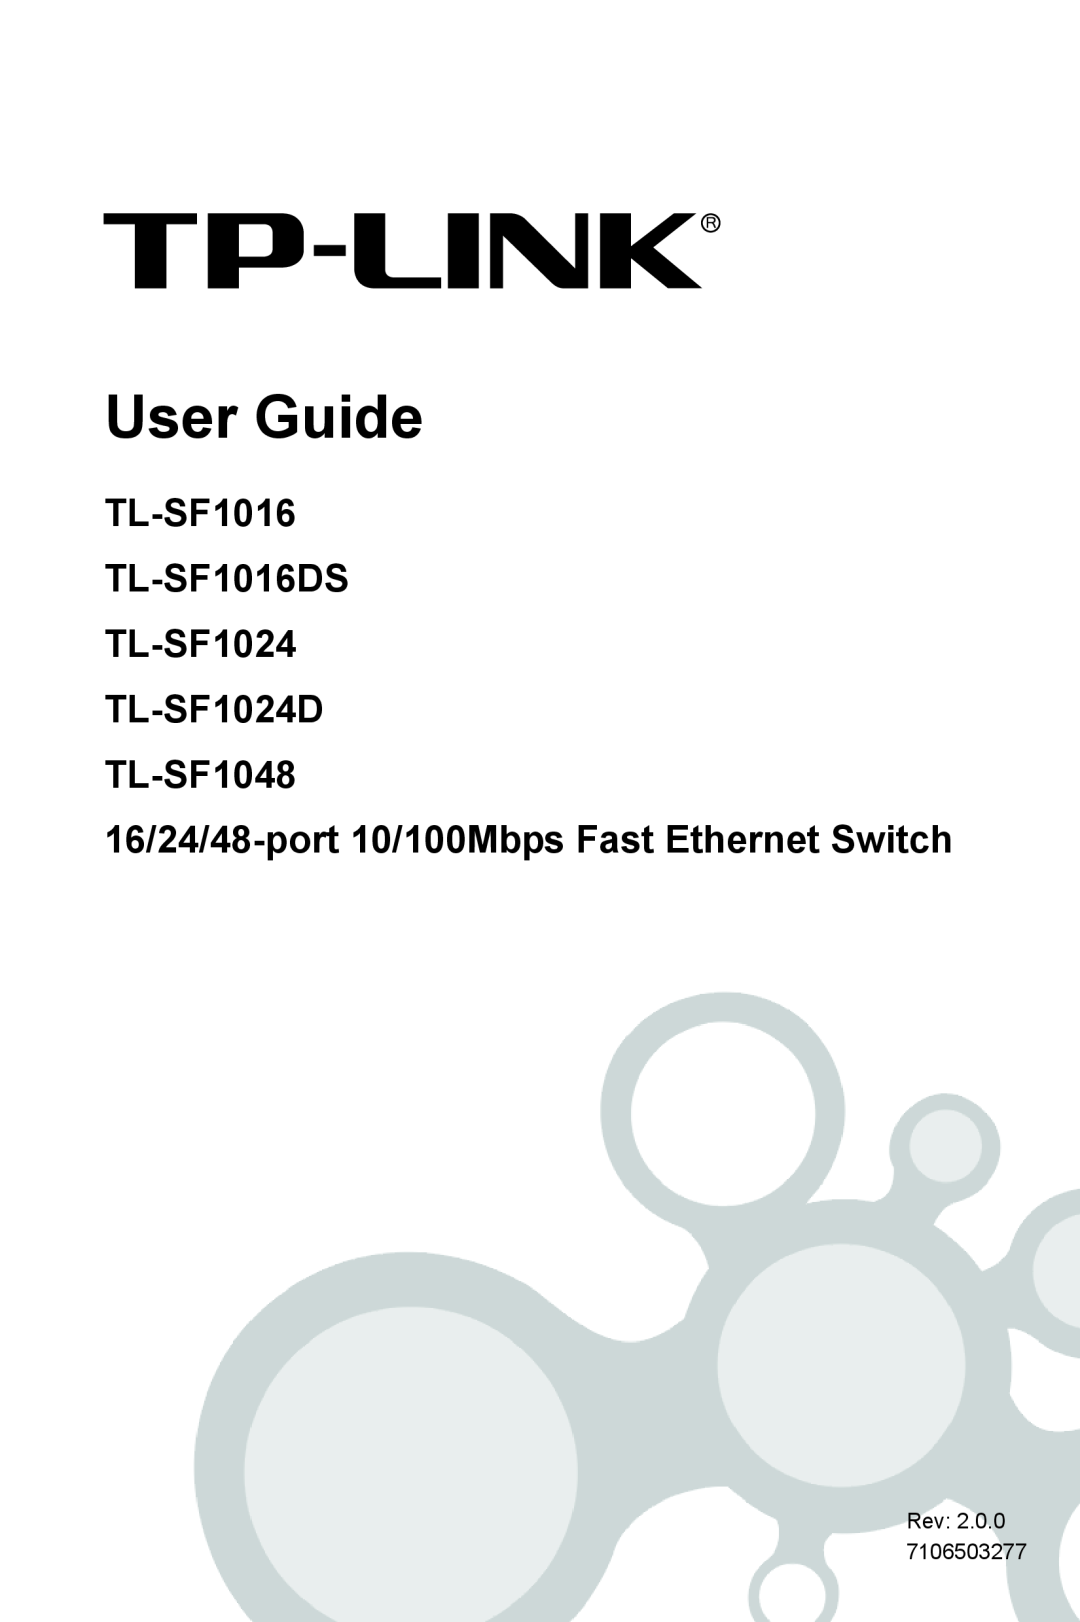 TP-Link TL-SF1024D, TL-SF1048, TL-SF1016DS manual User Guide, 16/24/48-port 10/100Mbps Fast Ethernet Switch 